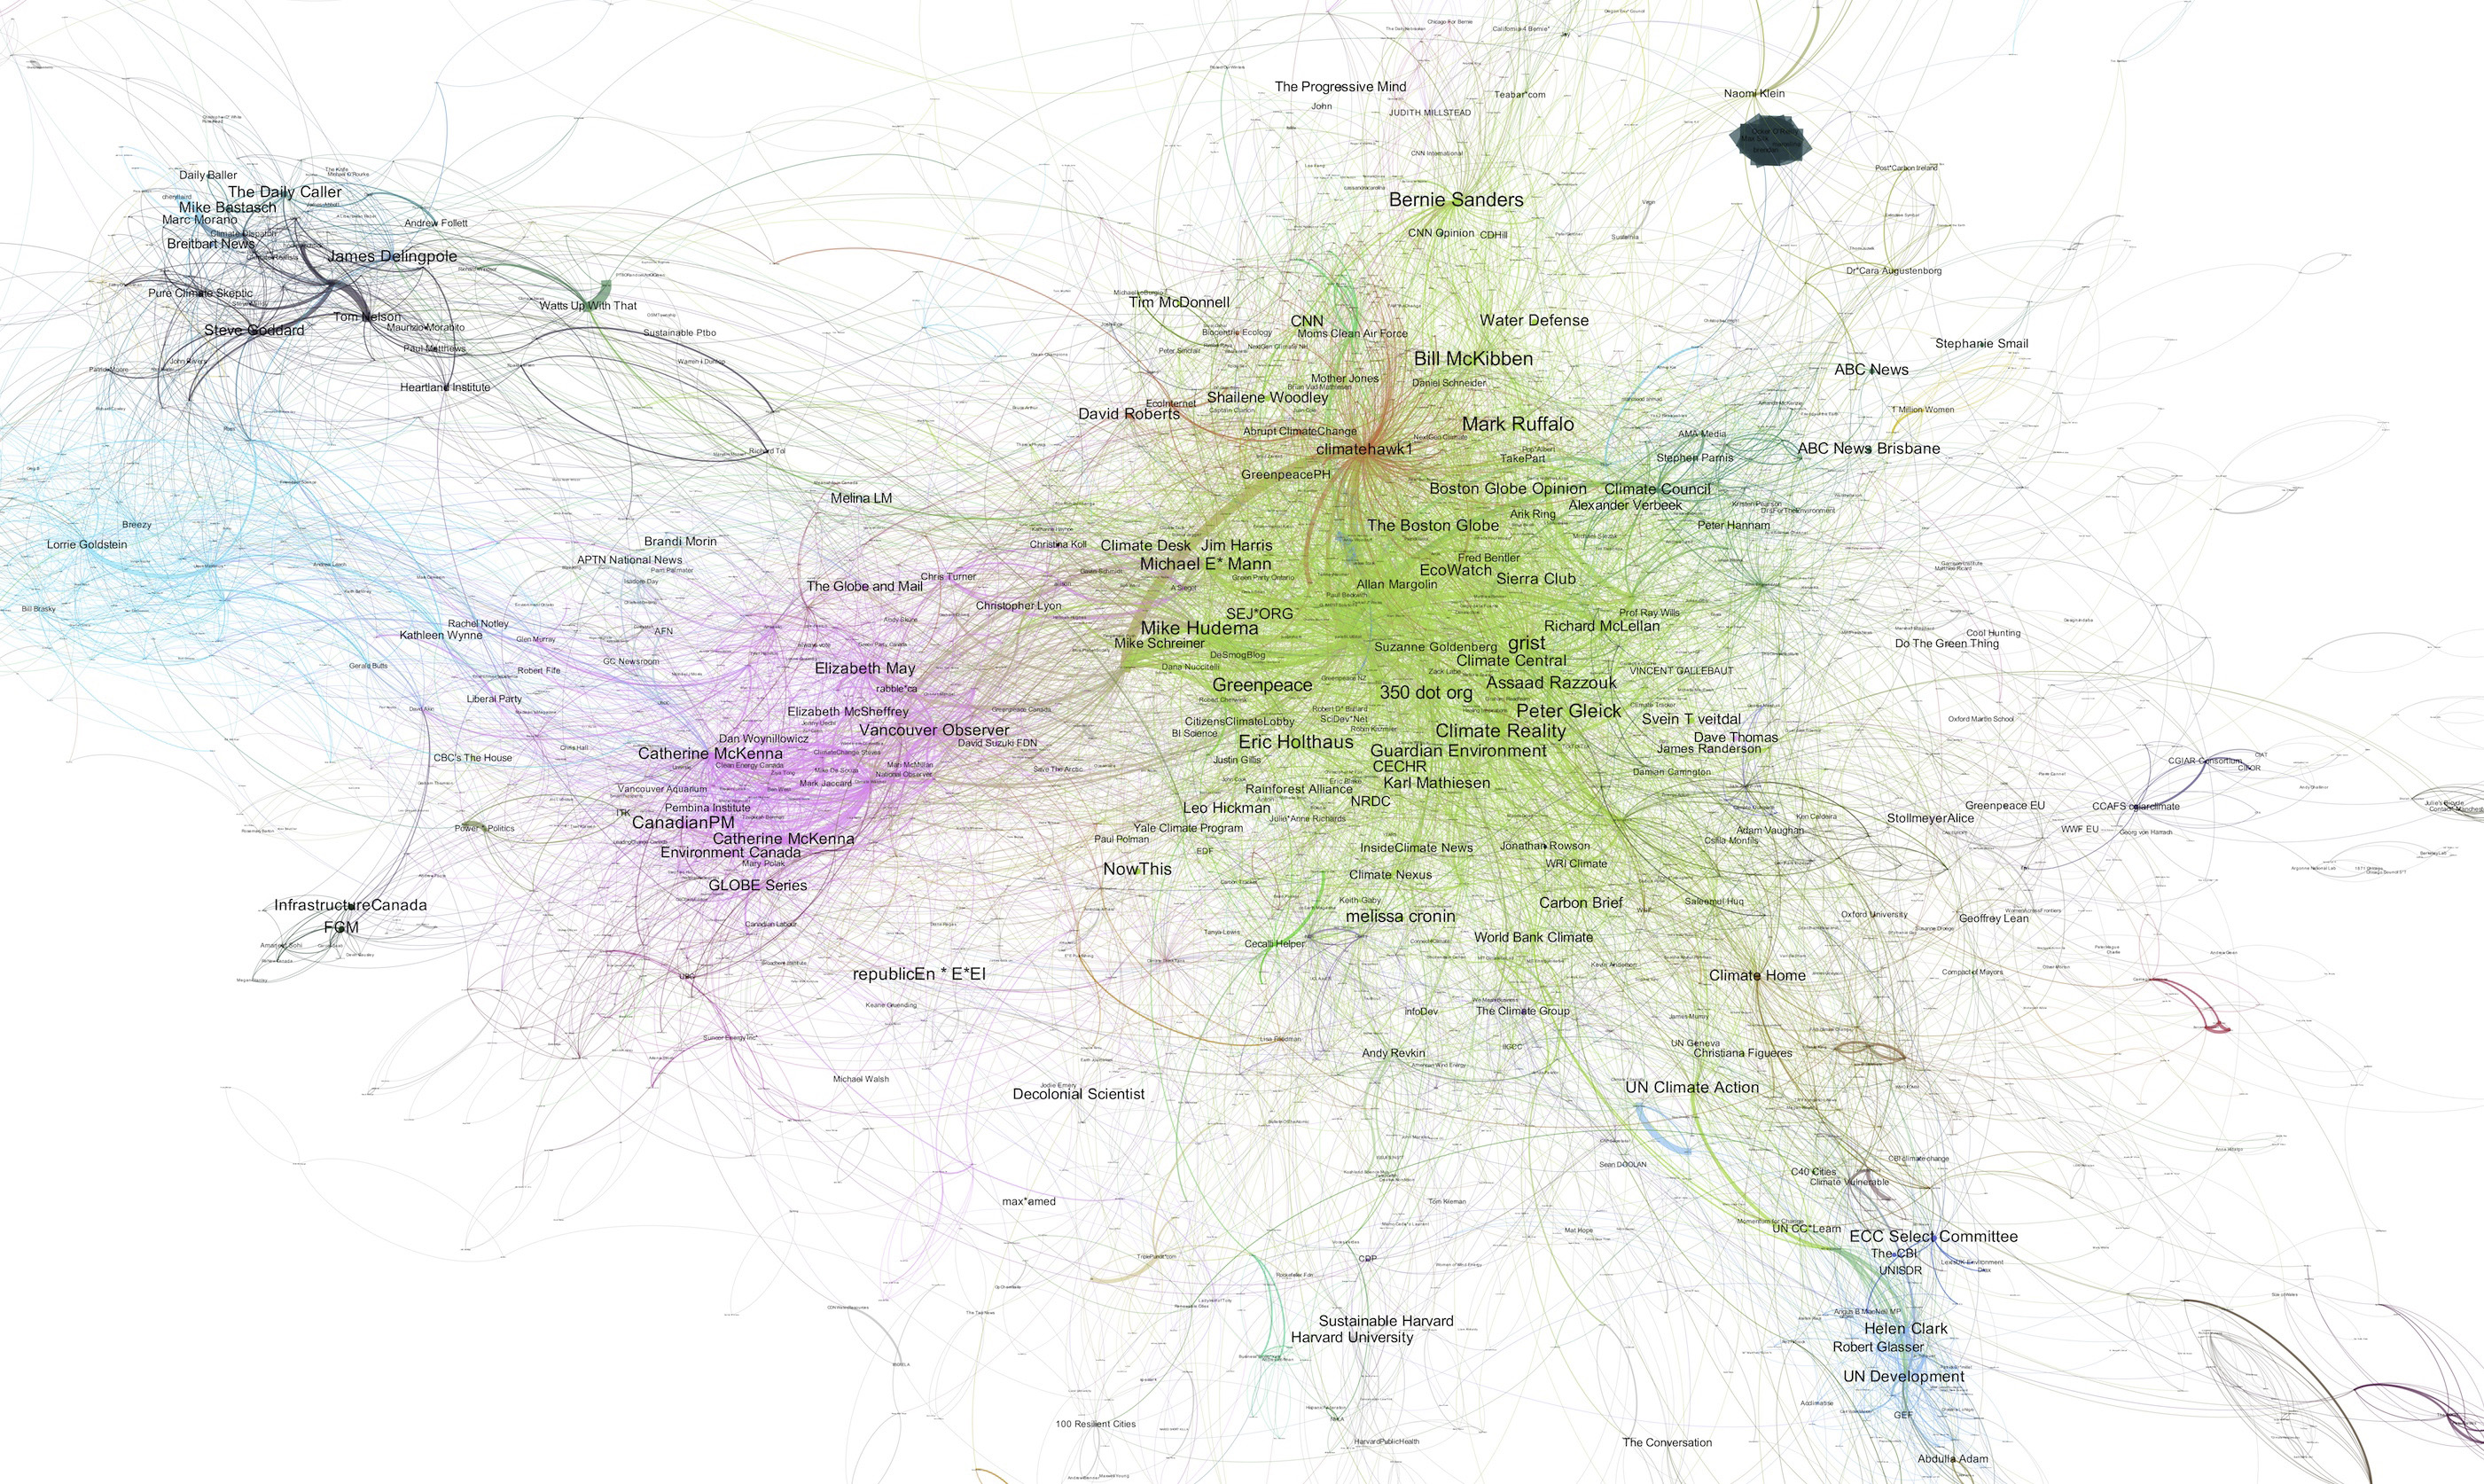 Twitter Network Map for Strongly Connected users, week ending 06 March 2016, close up of central section.